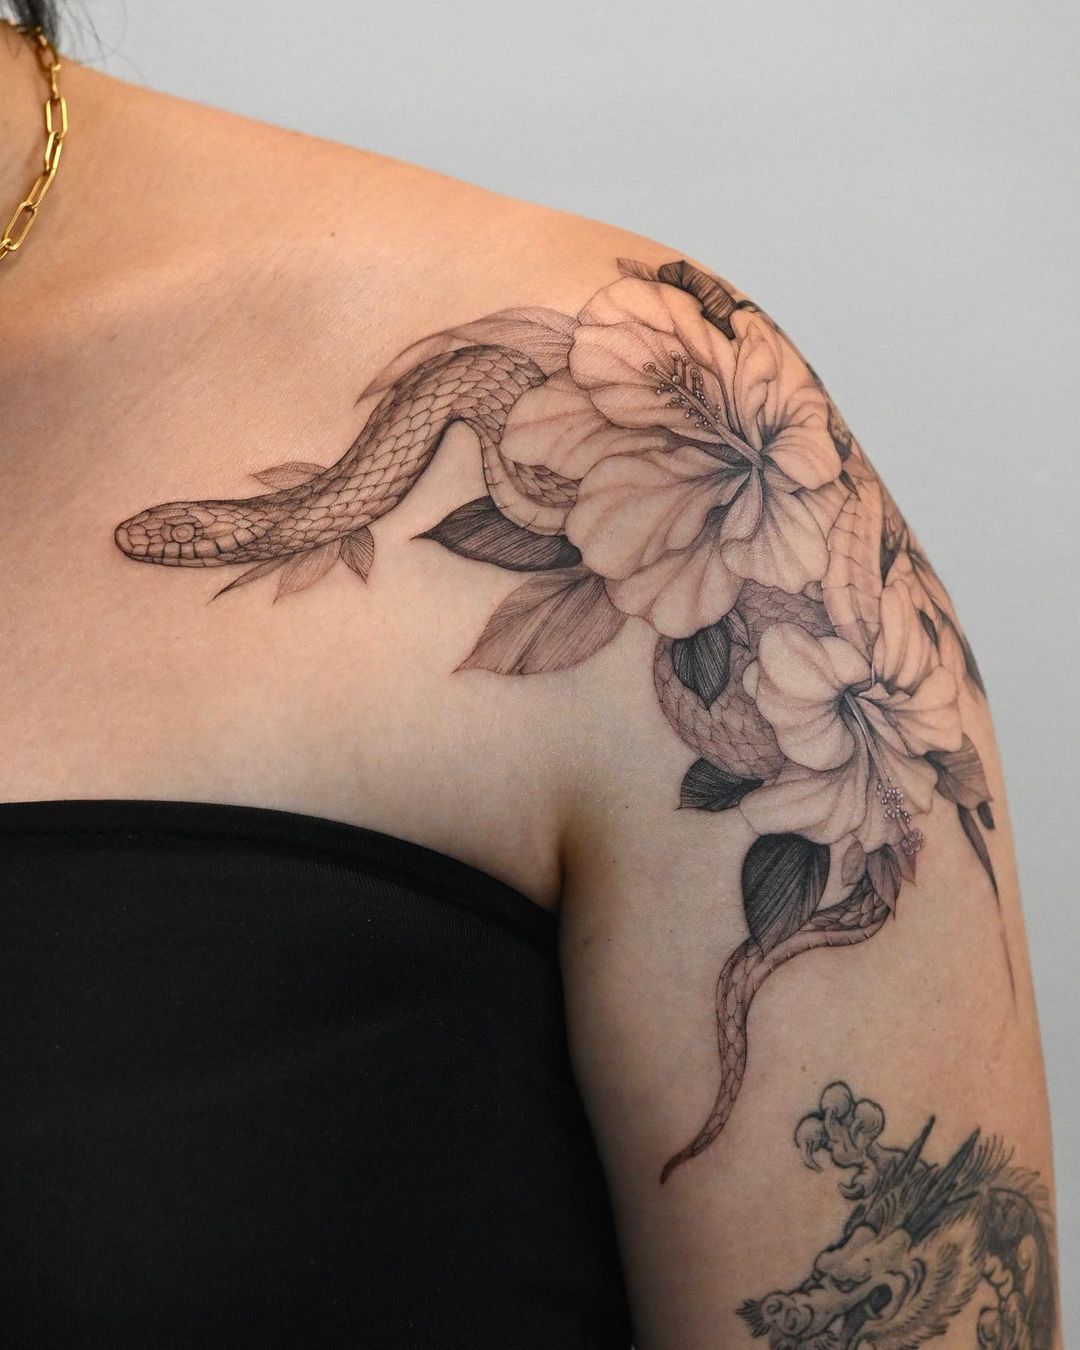 Black and White Hibiscus Flower Tattoo with Snake on Shoulder